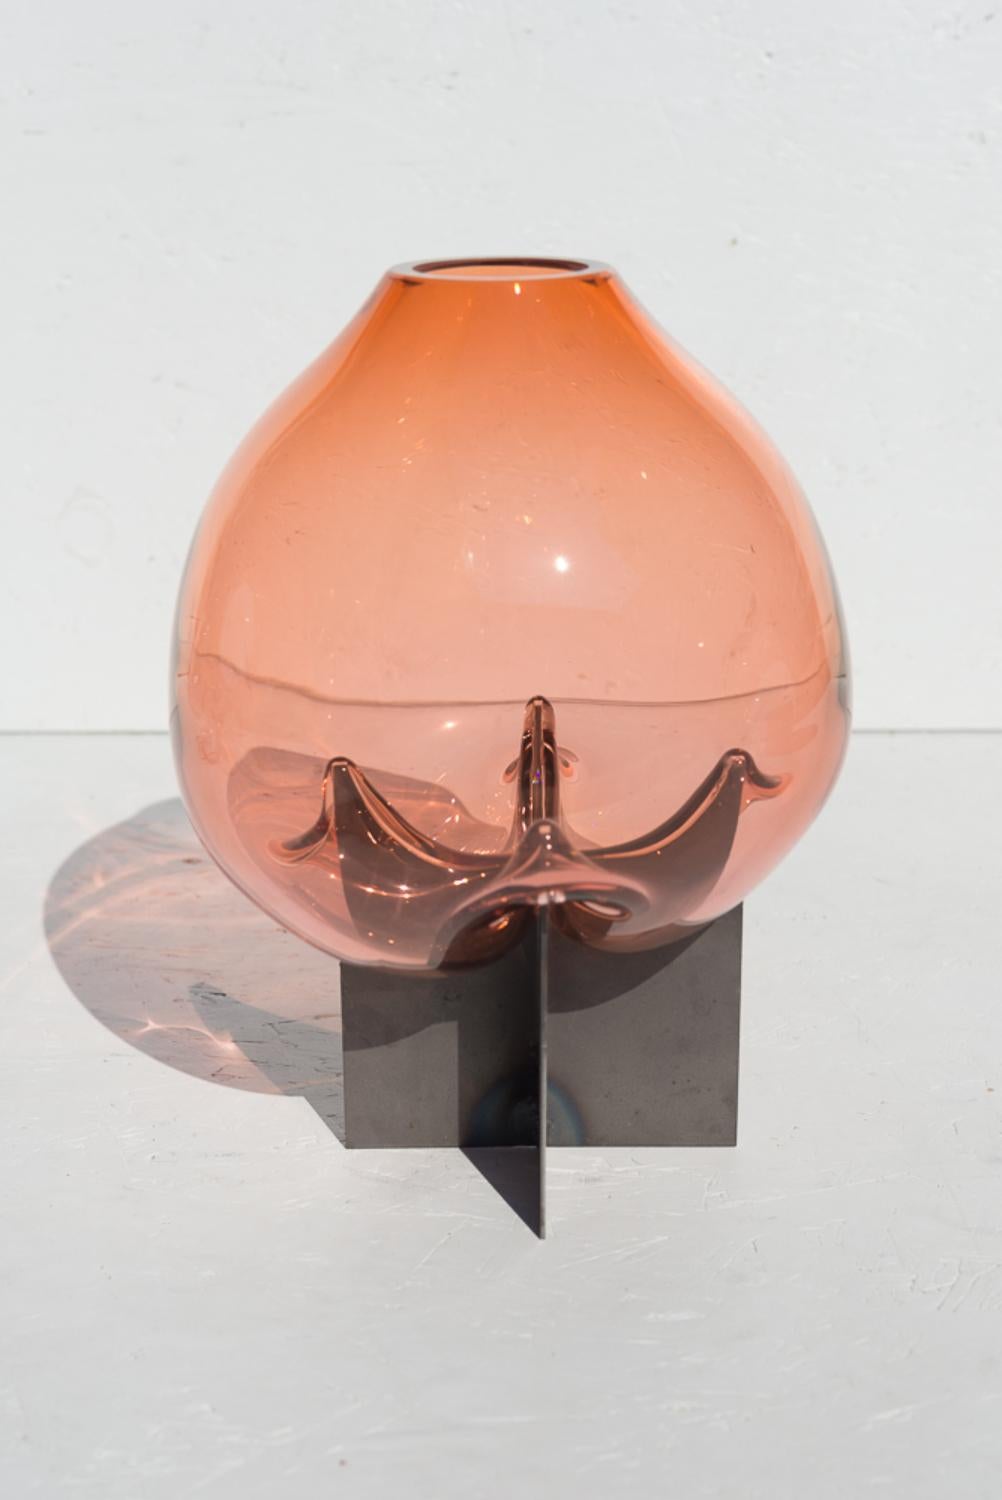 Set of 2 pink pierced table vase by Studio Thier & van Daalen
Dimensions: W 35 x D 25 x H 25cm
Materials: Steel, glass

The studio was keen to find a way to display the fluidity of glass. Therefore they sought the contrast between the industrial